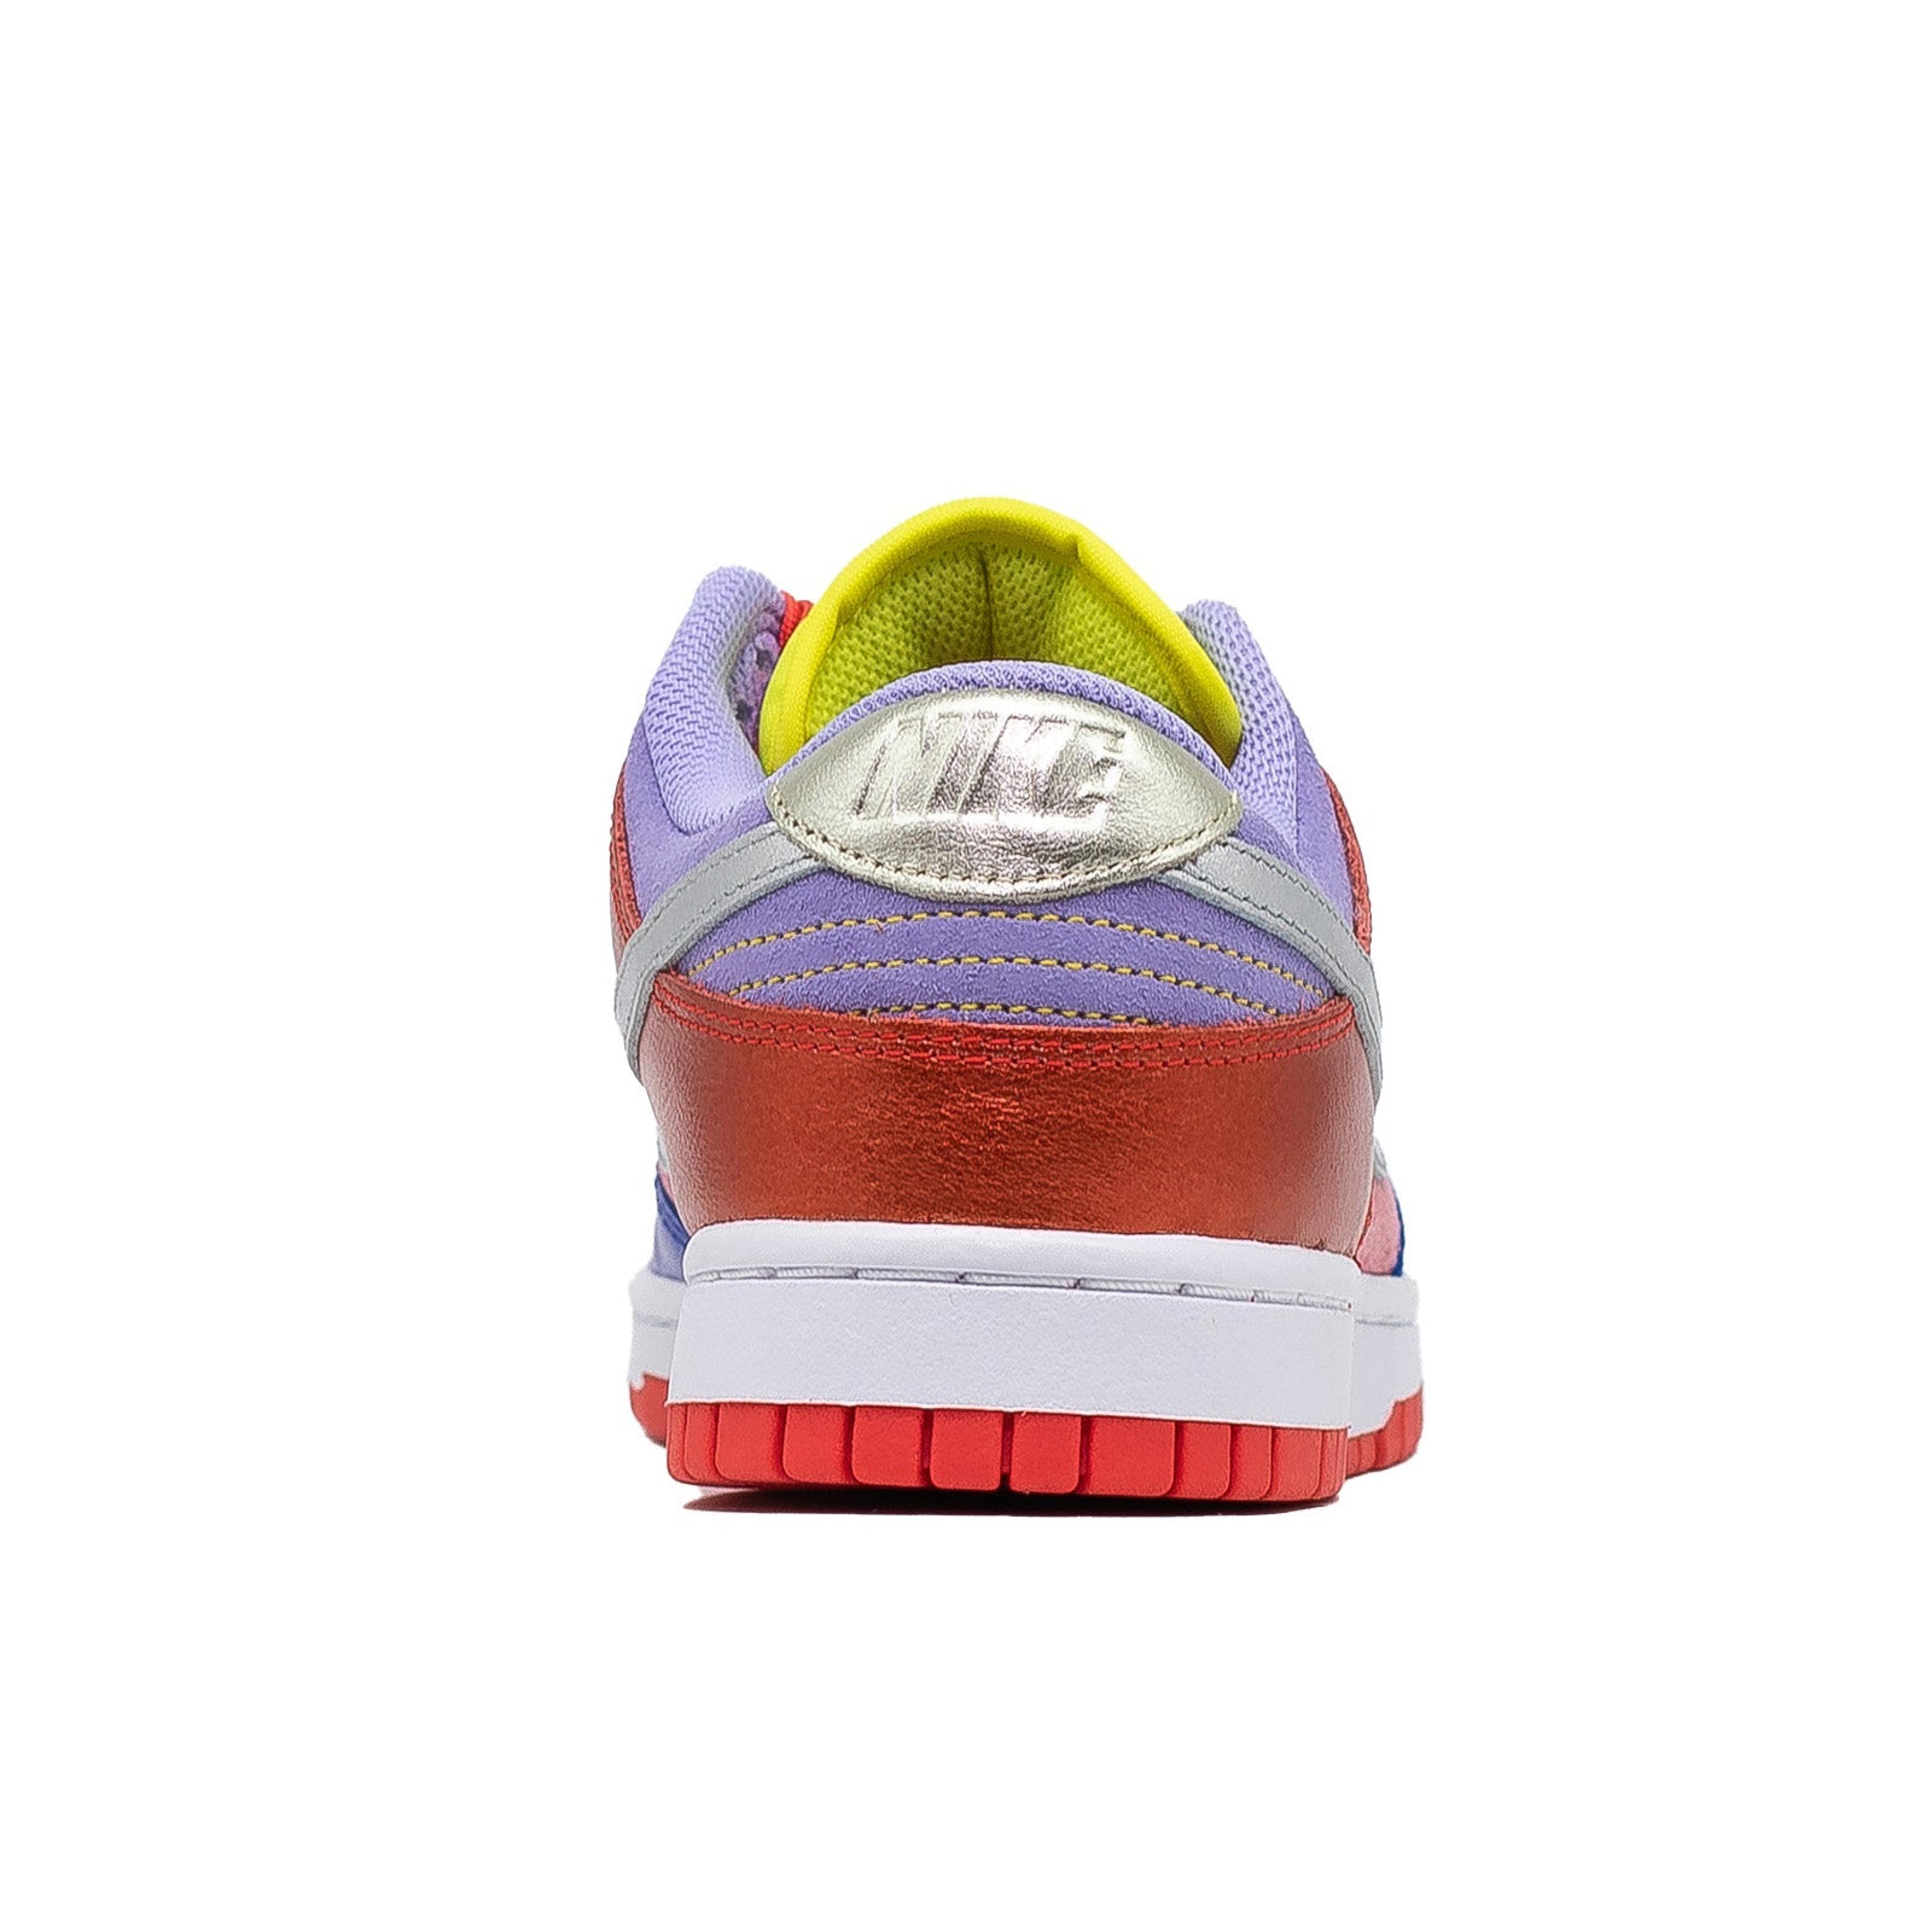 Alternate View 2 of Women's Nike Dunk Low, Sunset Pulse